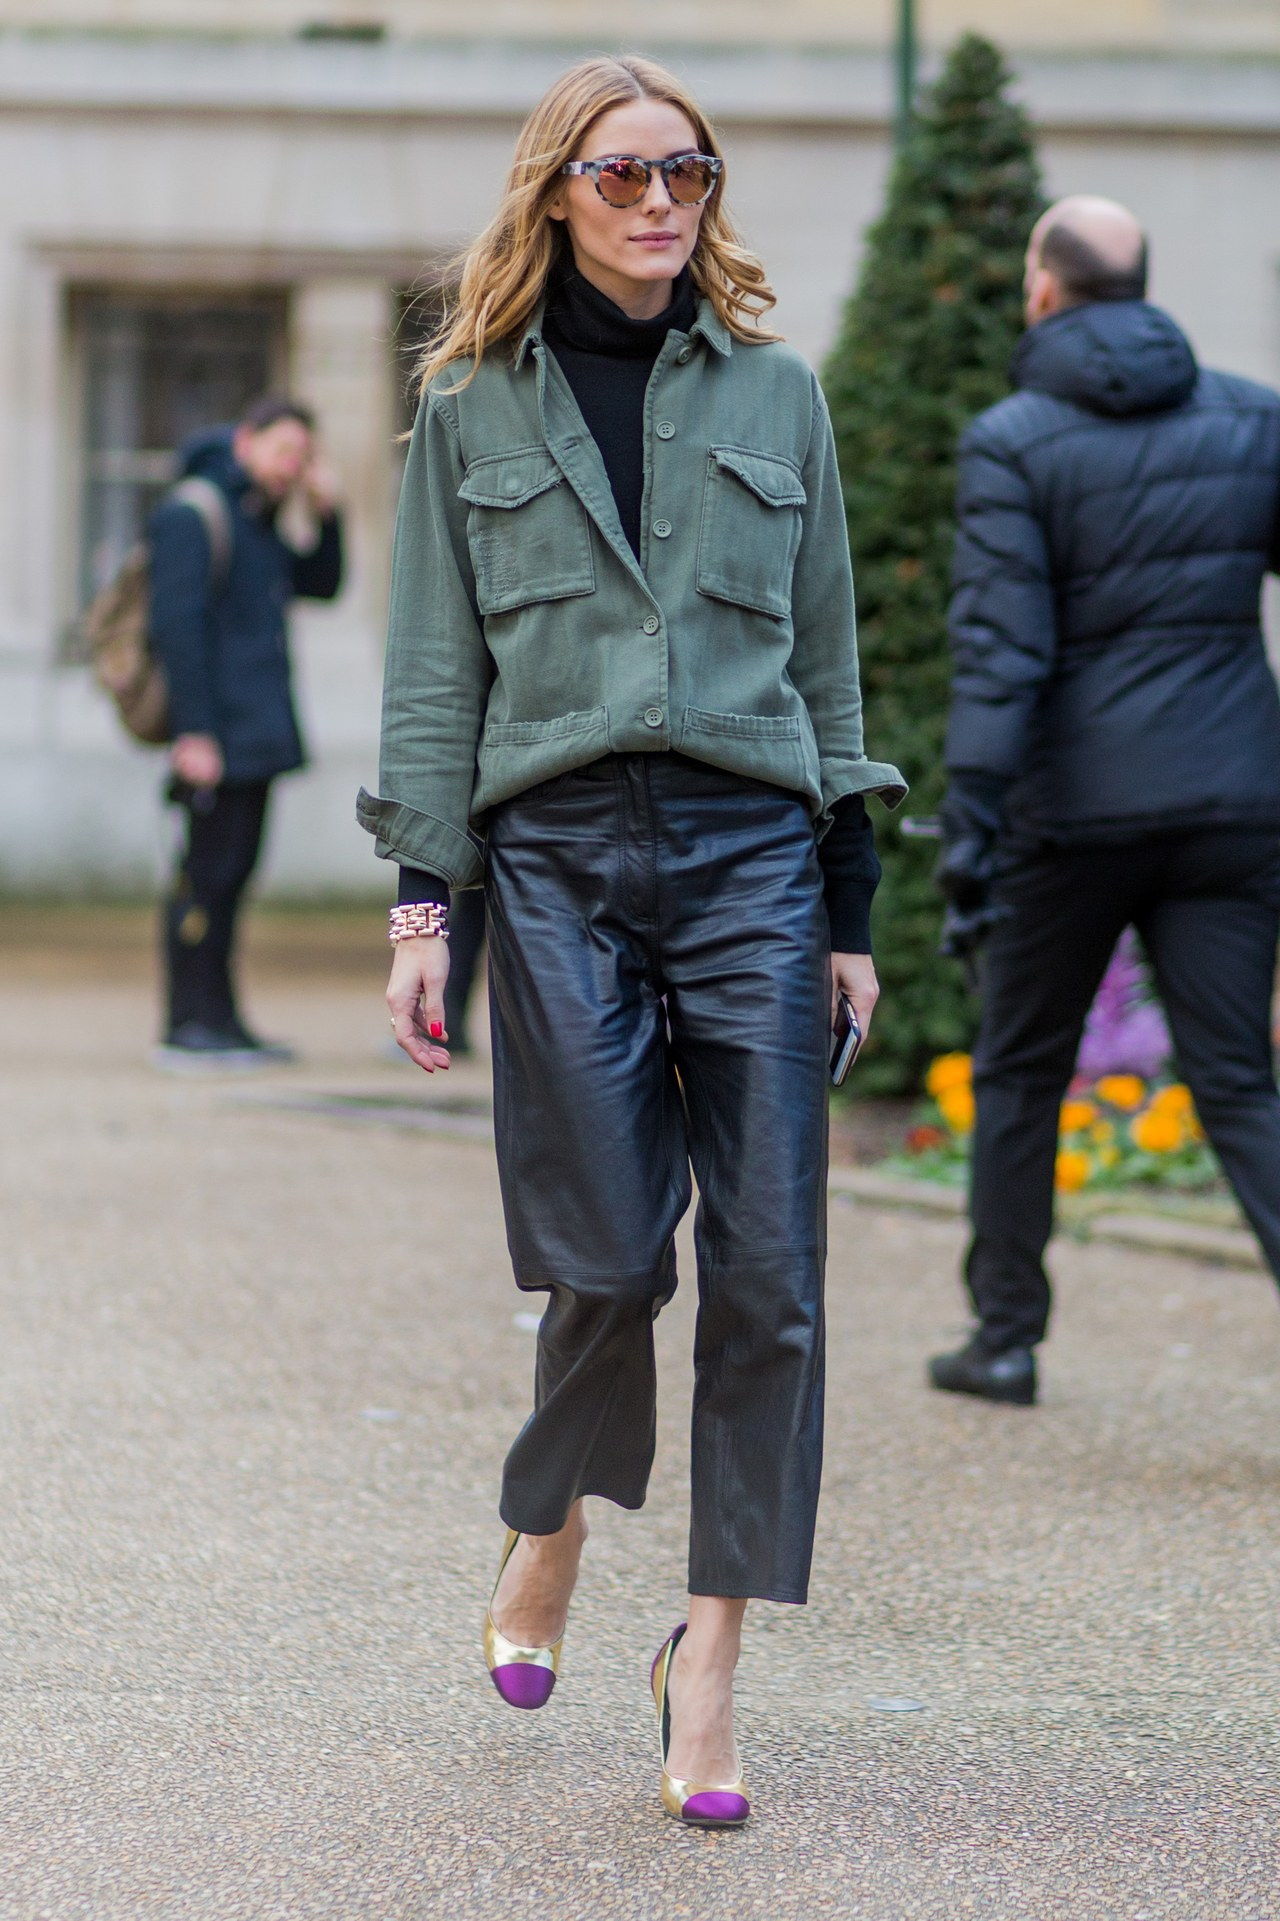 PAŘÍŽ, FRANCE - March 07: Olivia Palermo wearing a green jacket and black leather pants outside Giambattista Valli during the Paris Fashion Week Womenswear Fall/Winter 2016/2017 on March 7, 2016 in Paris, France. (Photo by Christian Vierig/Getty Images)